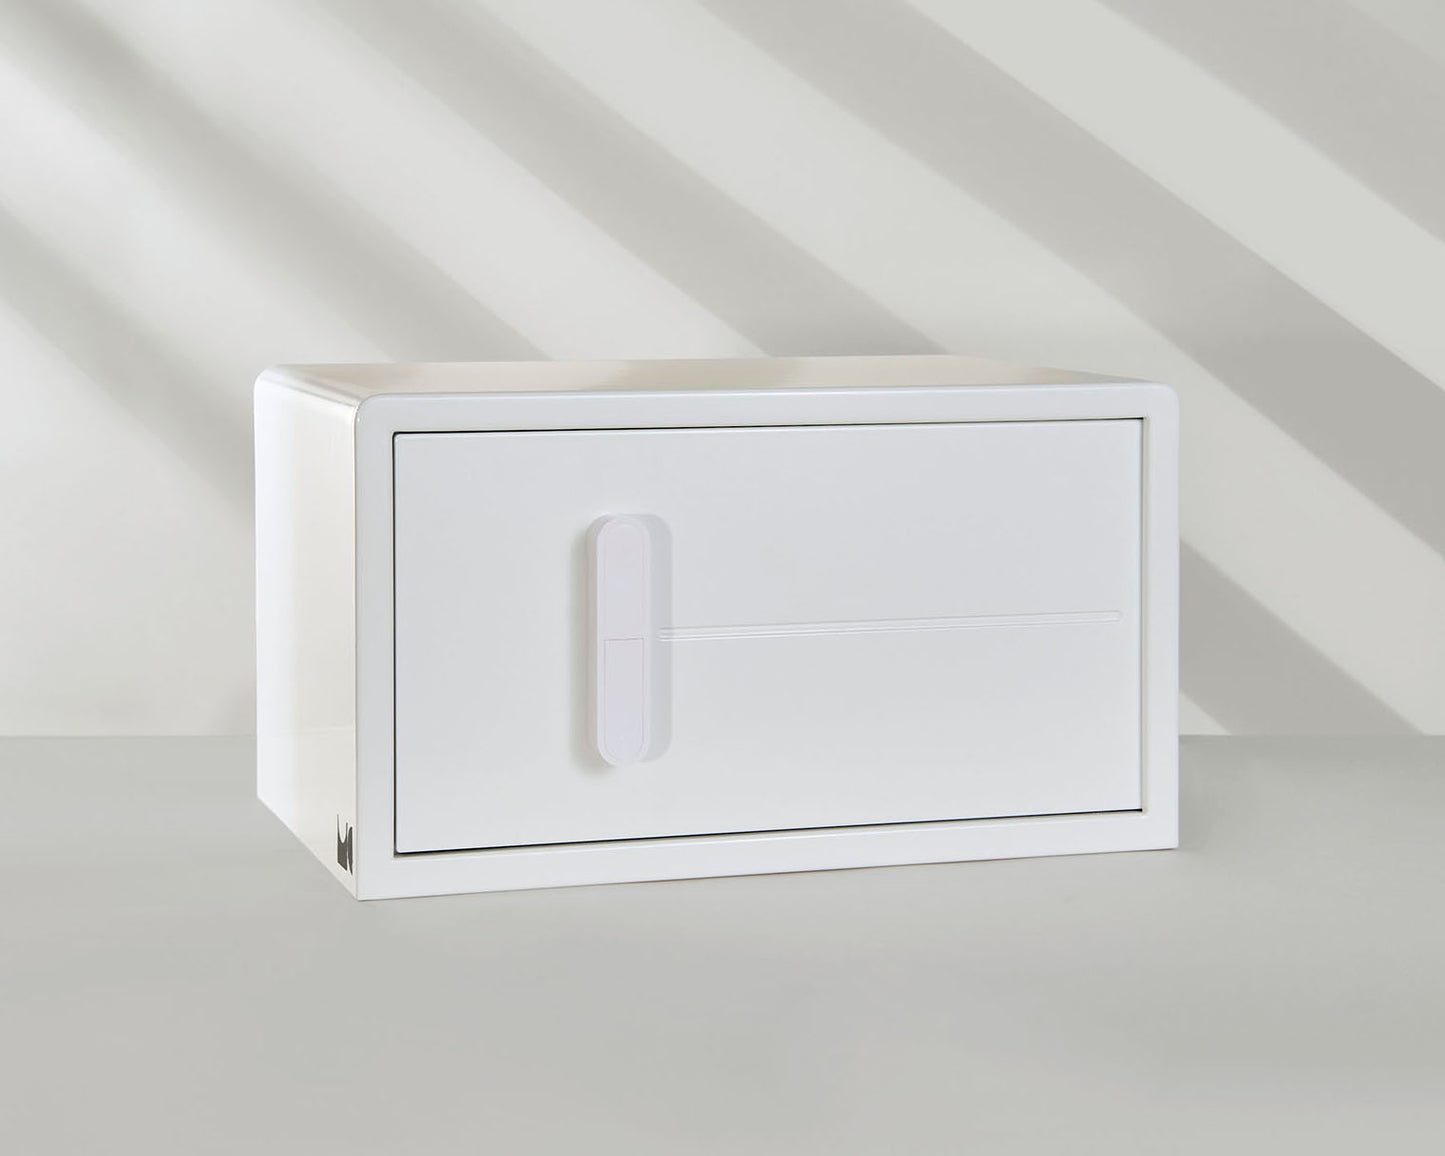 An angled image of the white iCube